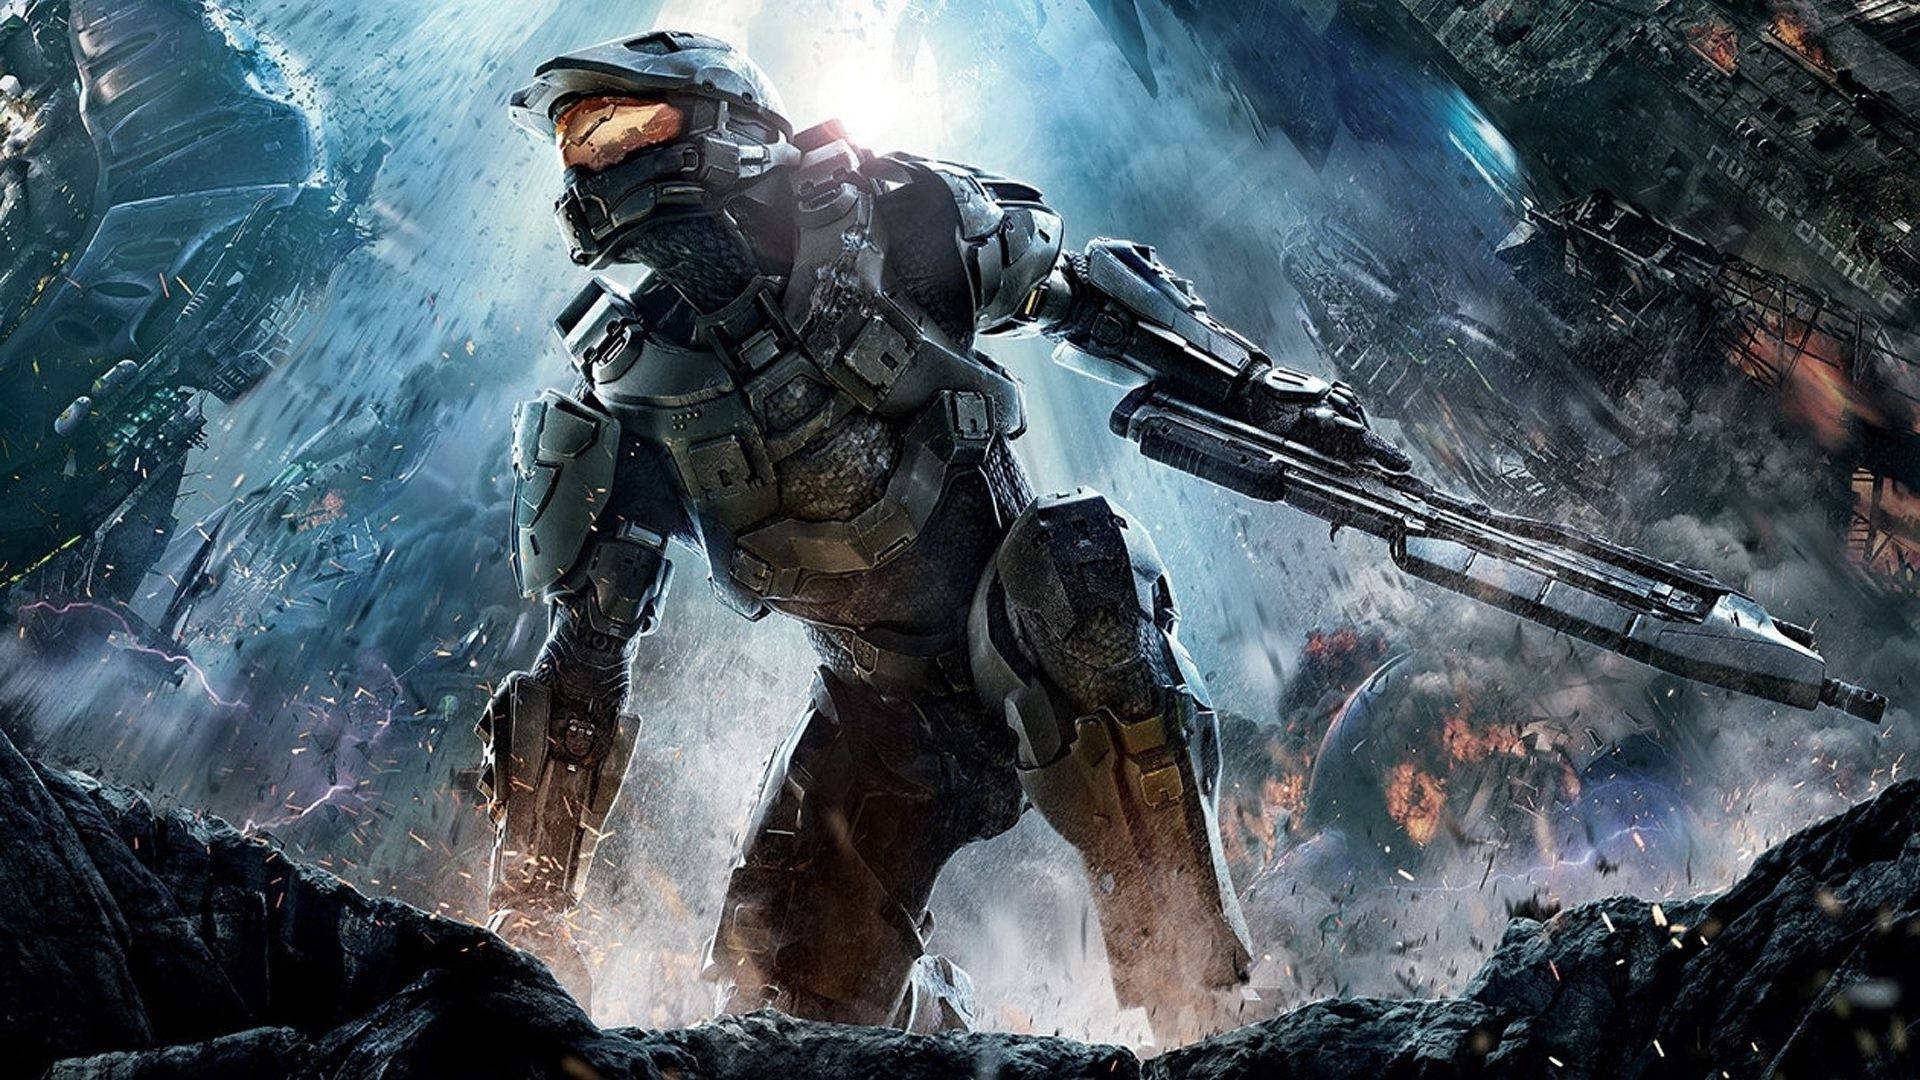 Master Chief ready to protect humanity Wallpaper